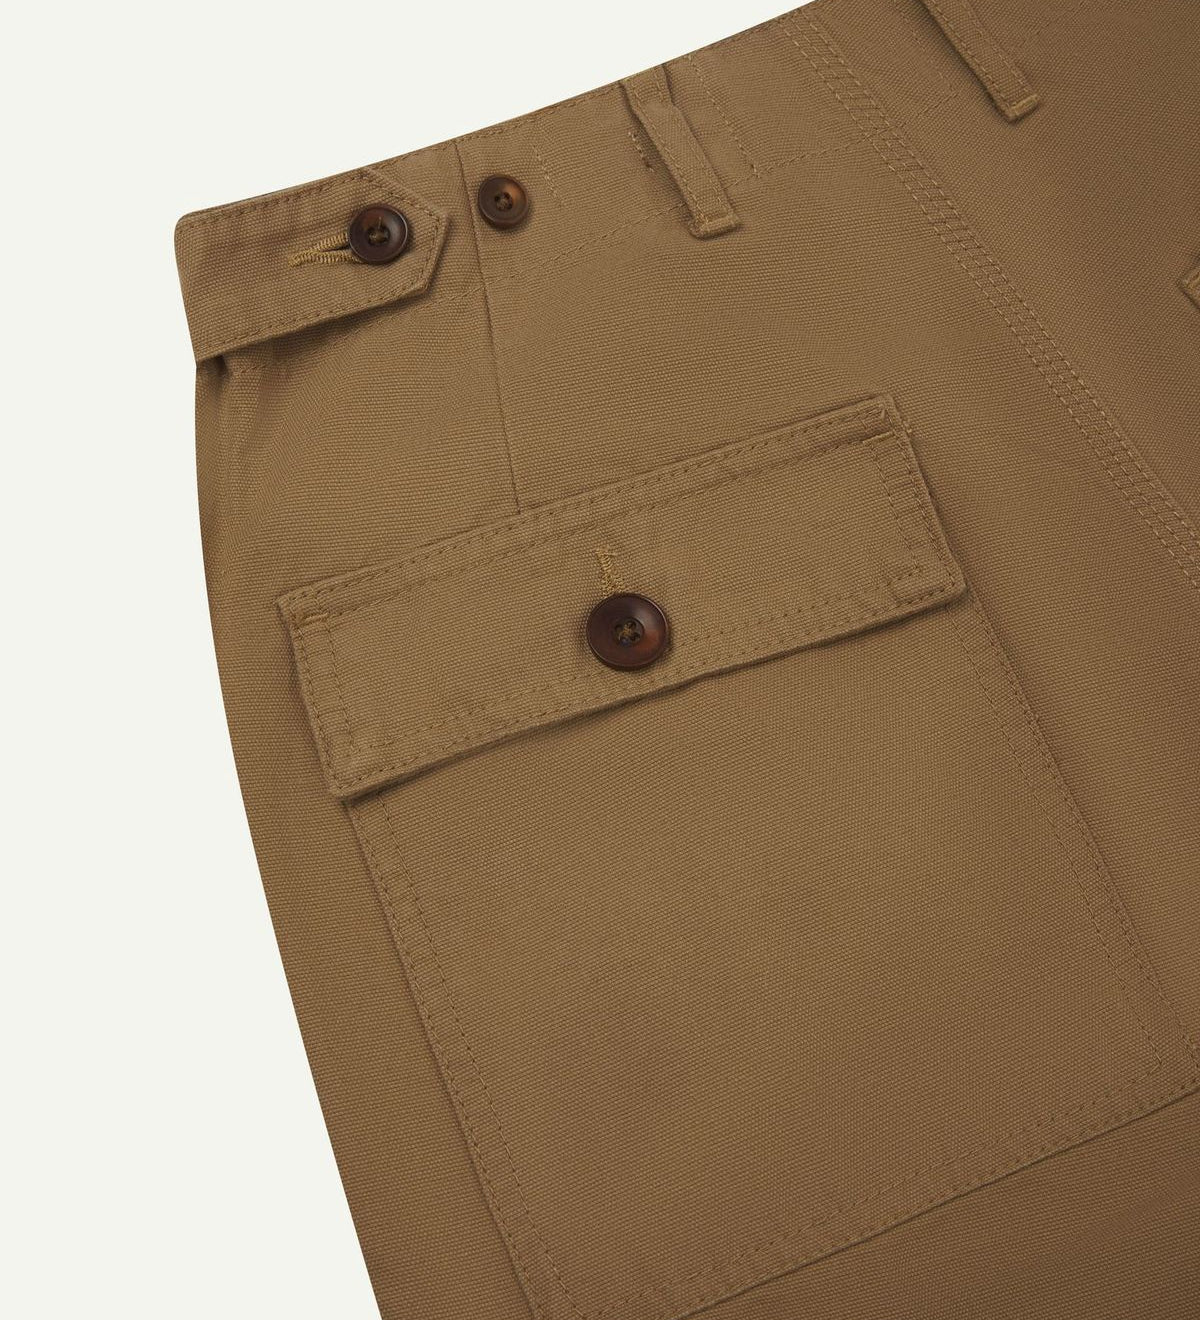 Close-up reverse view of Uskees khaki cotton work pants with focus on left rear pocket, belt loops, triple stitching and adjustable button waist.